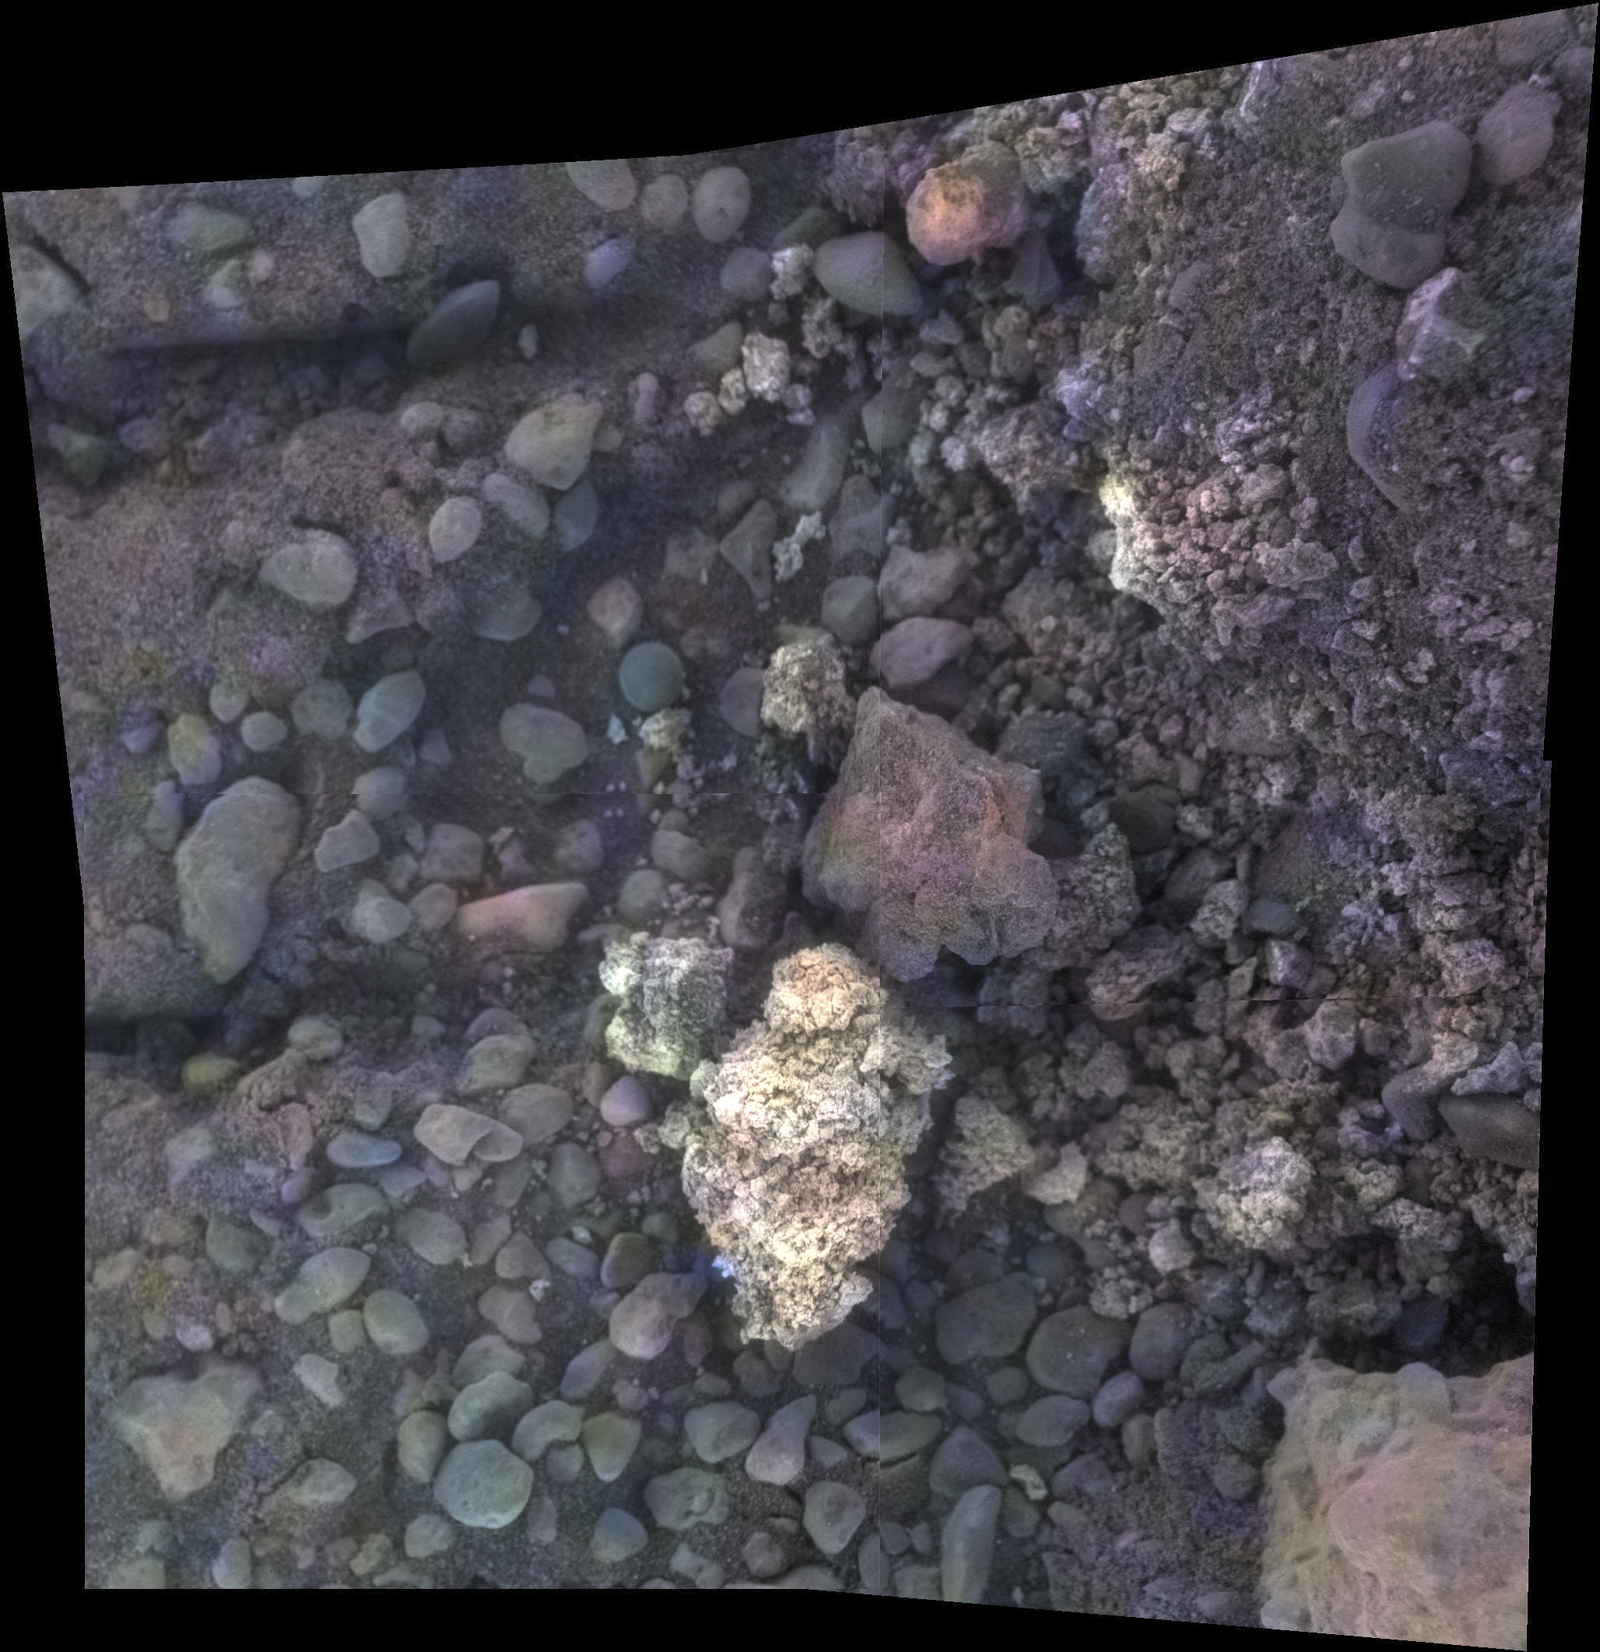 This May 29, 2016, image of a target called "Private Joseph Field" combines images from the microscopic imager on NASA's Mars Exploration Rover Opportunity with enhanced color information from the rover's panoramic camera. The target is on the western rim of Mars' Endeavour Crater.